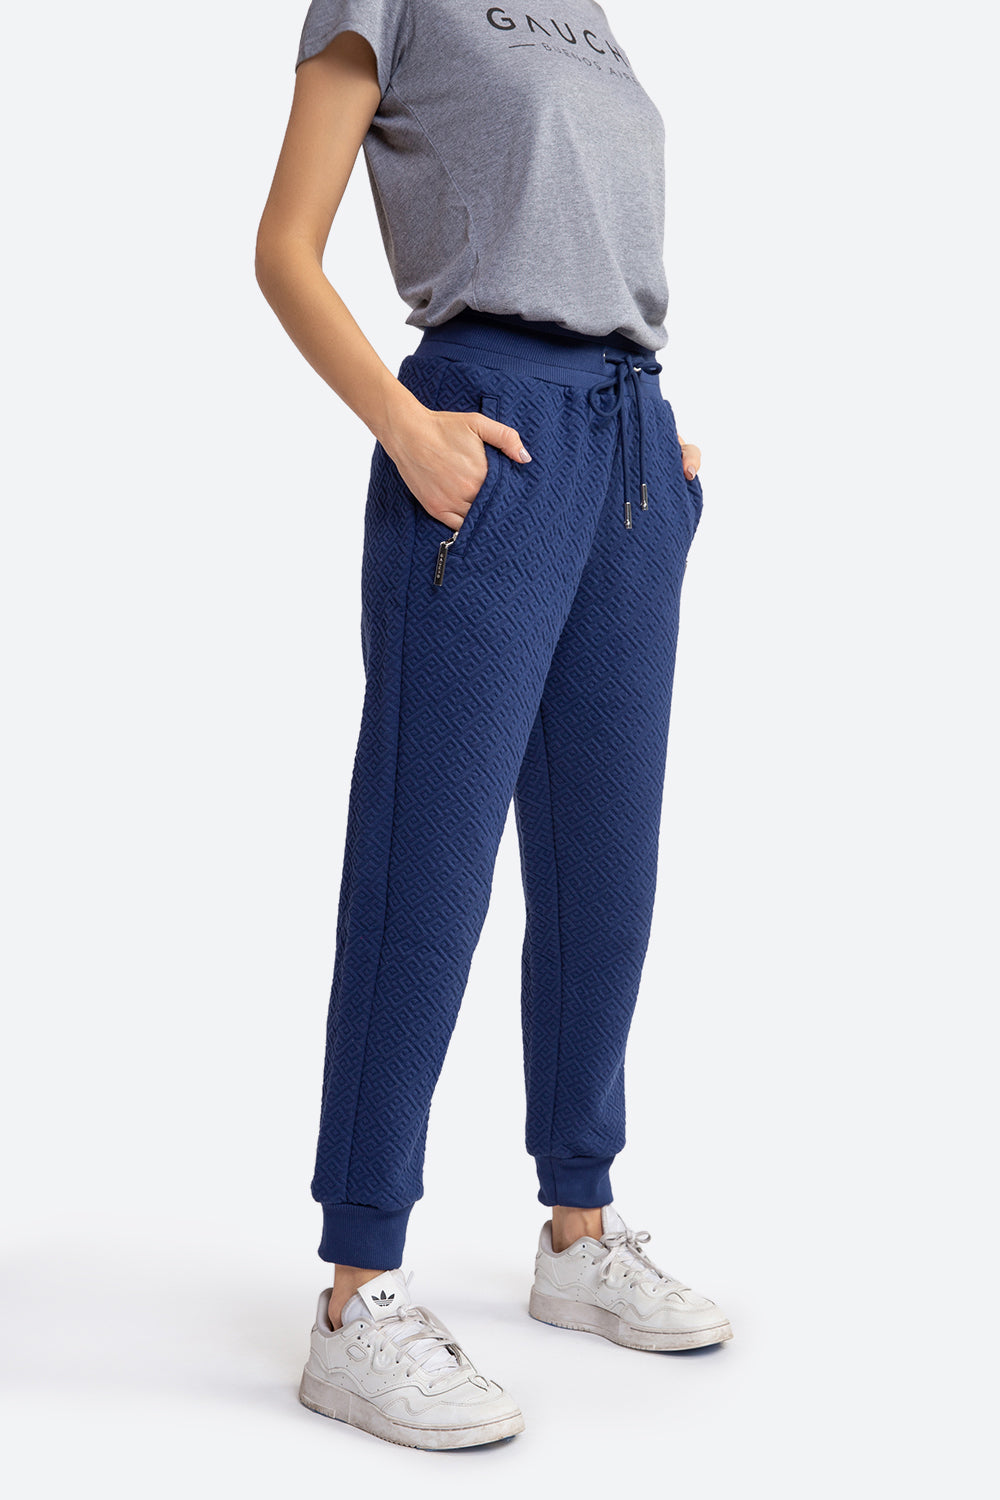 Woman wearing the Belgrano Gaucho Pattern Track Pants in Navy